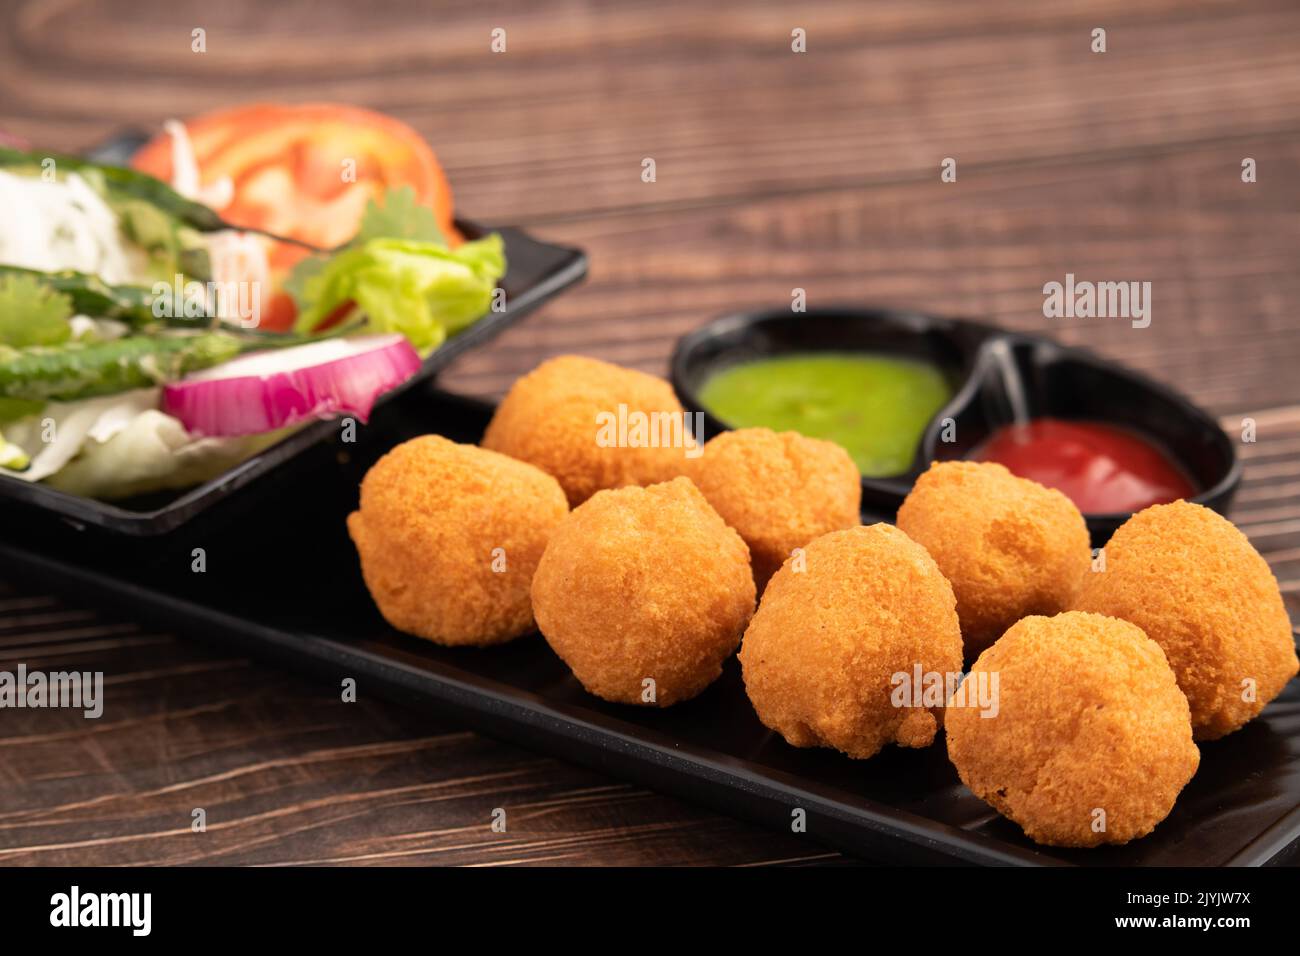 Indian Delhi Street Chaat Food Ram Laddu Pakode Or Raam Ladoo Pakore Is Made Of Moong Dal, Yellow Mung Lentils, Chana Daal. Served With White Radish Stock Photo